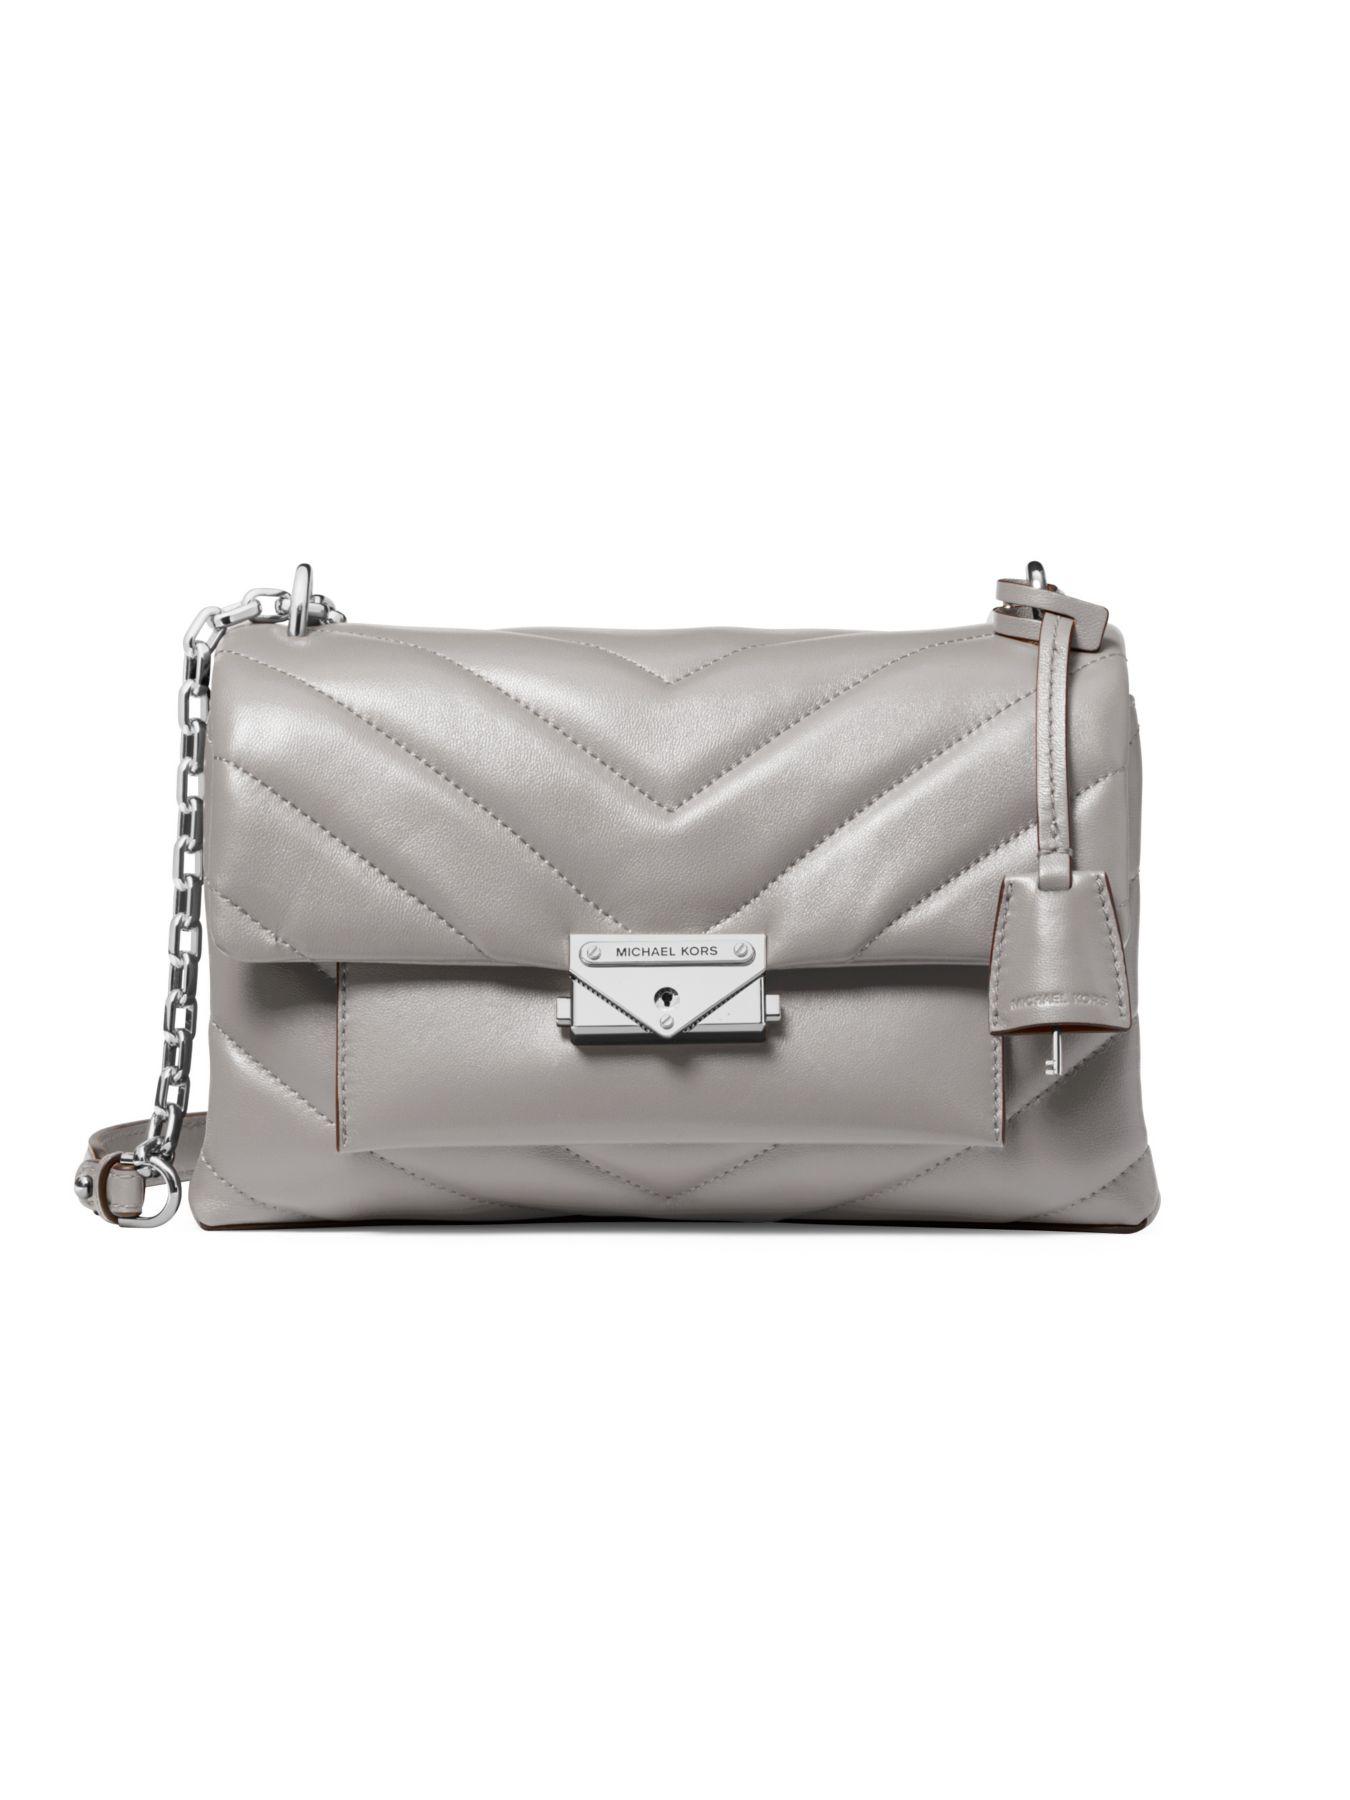 MICHAEL Michael Kors Medium Cece Quilted Leather Bag in Gray | Lyst